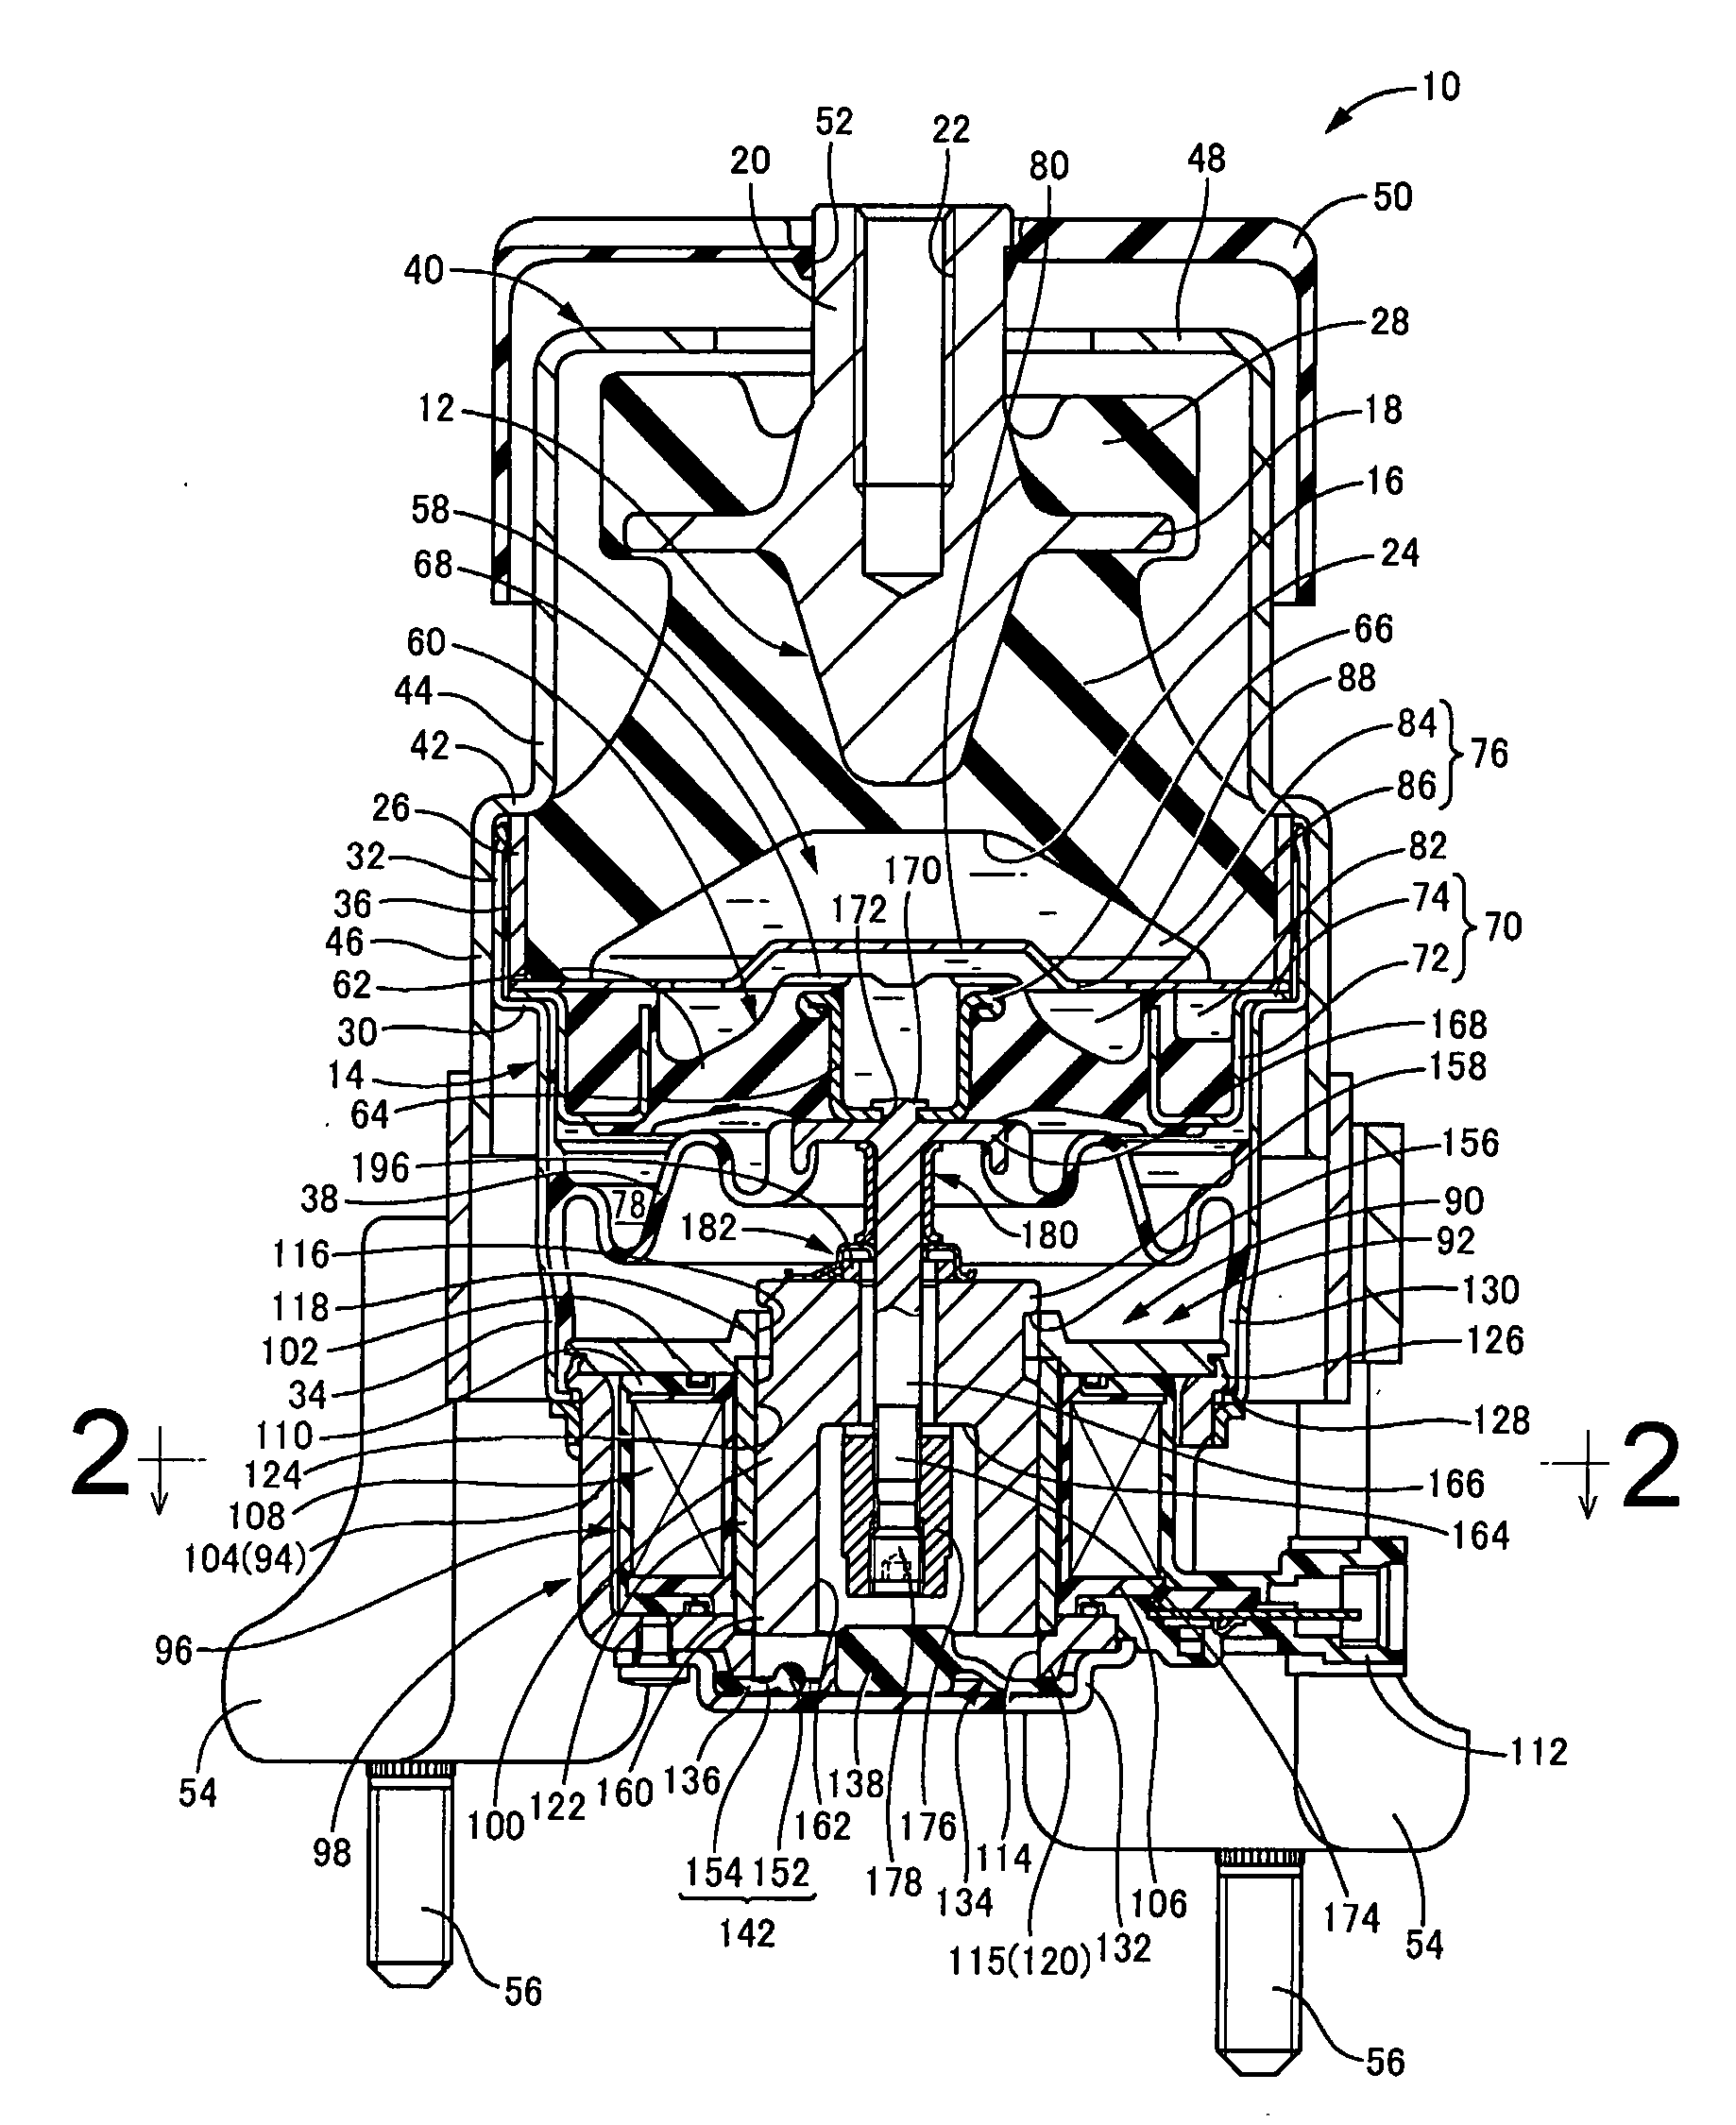 Electromagnetic actuator for active vibration damping device